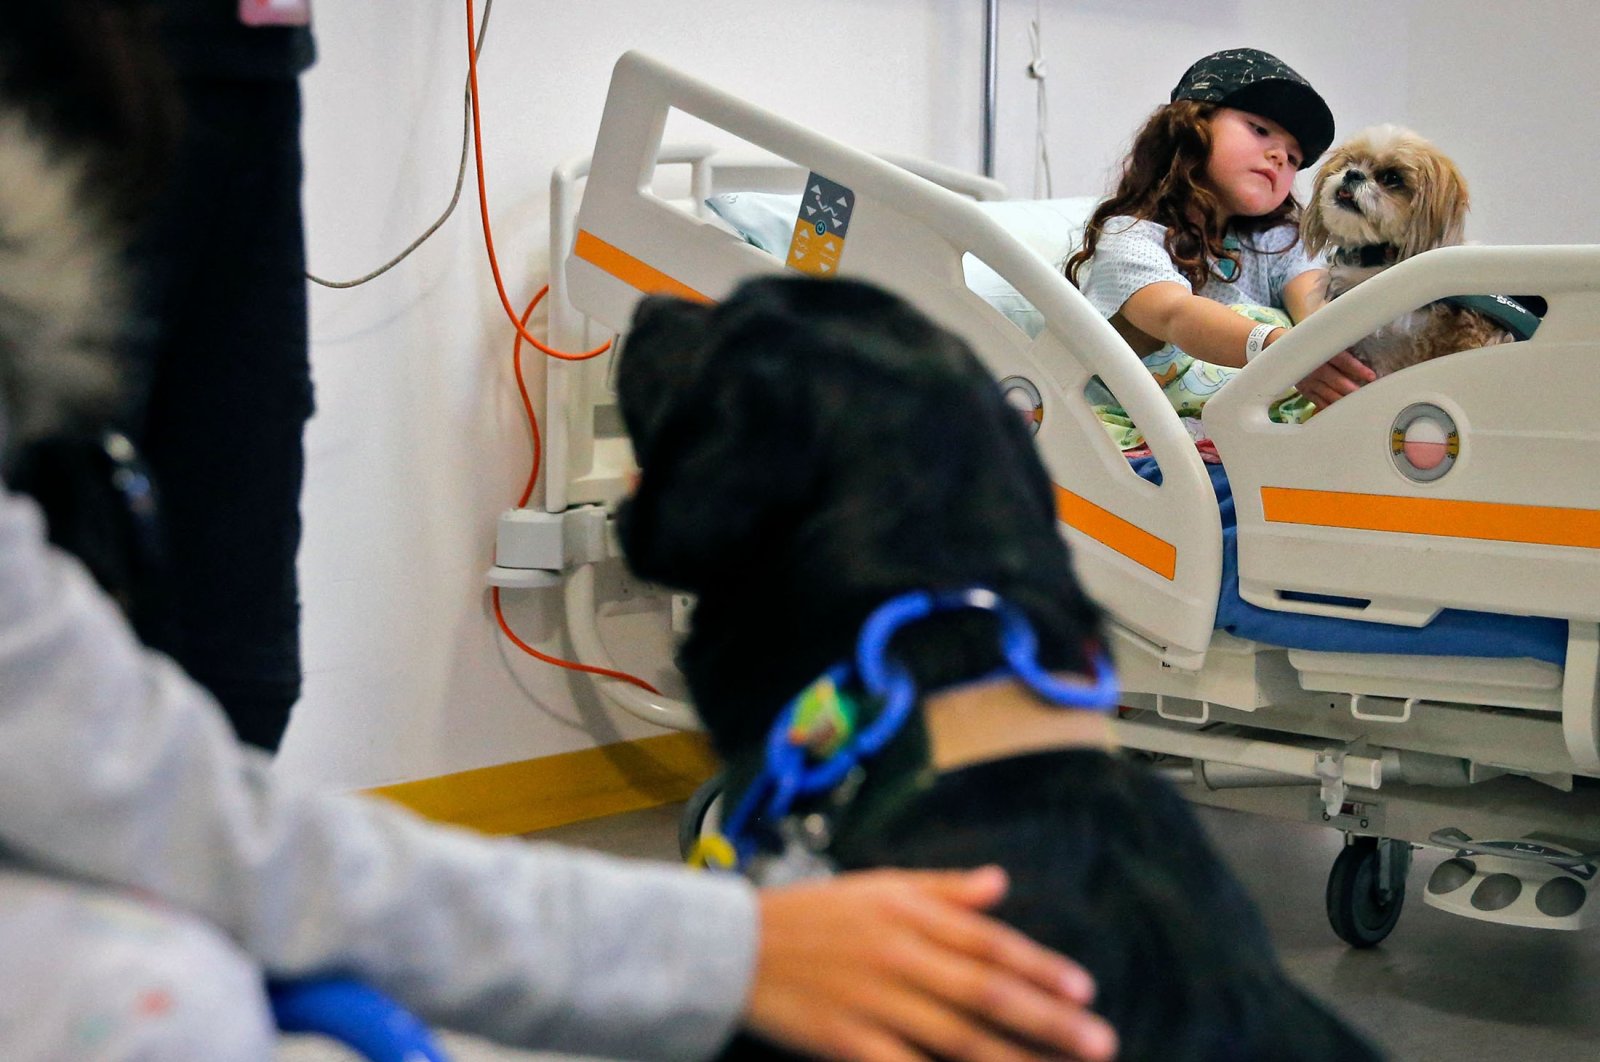 Therapy dogs Morron (C) and Pipa are seen at the Exequiel Gonzalez Pediatrics Hospital during a session with a girl who will undergo surgery in Santiago, Chile, July 28, 2021. (AFP Photo)